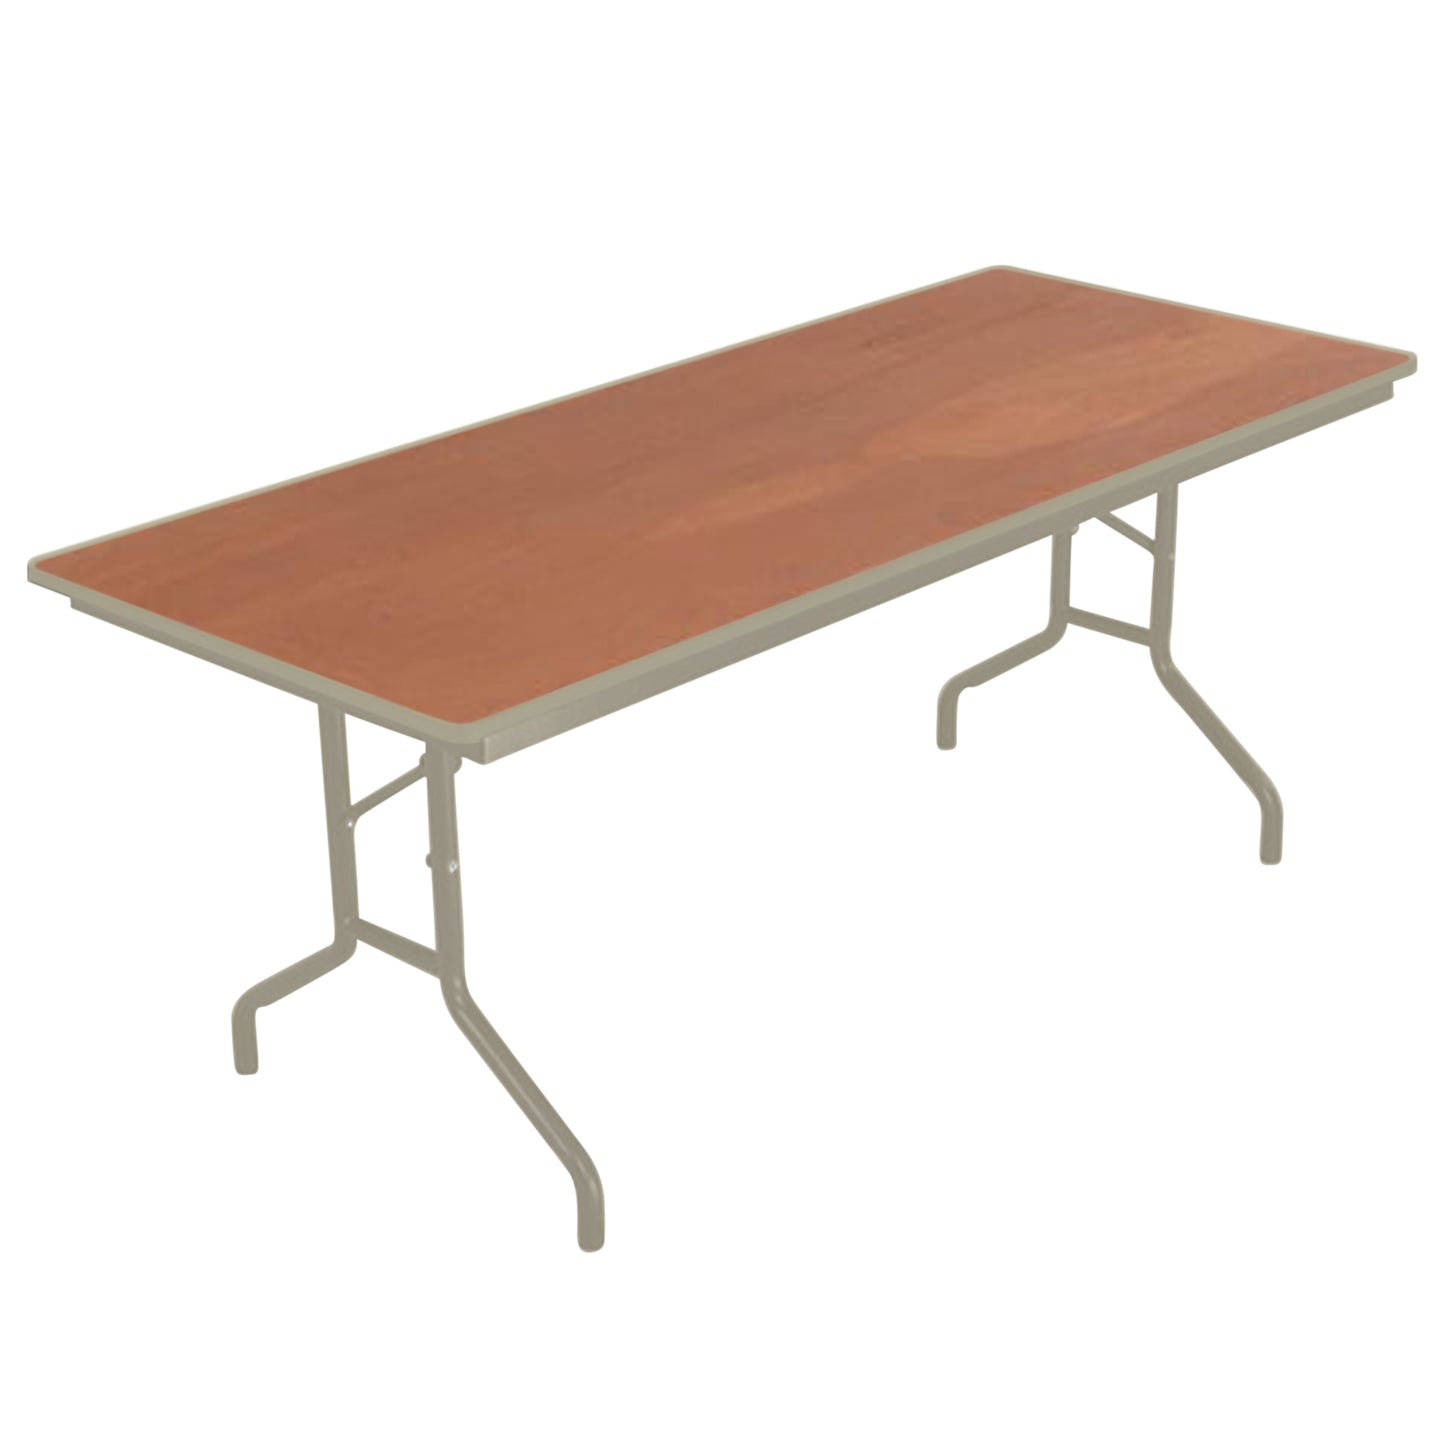 AmTab Folding Table - Plywood Stained and Sealed - Vinyl T-Molding Edge - 30"W x 72"L x 29"H  (AmTab AMT-306PM)